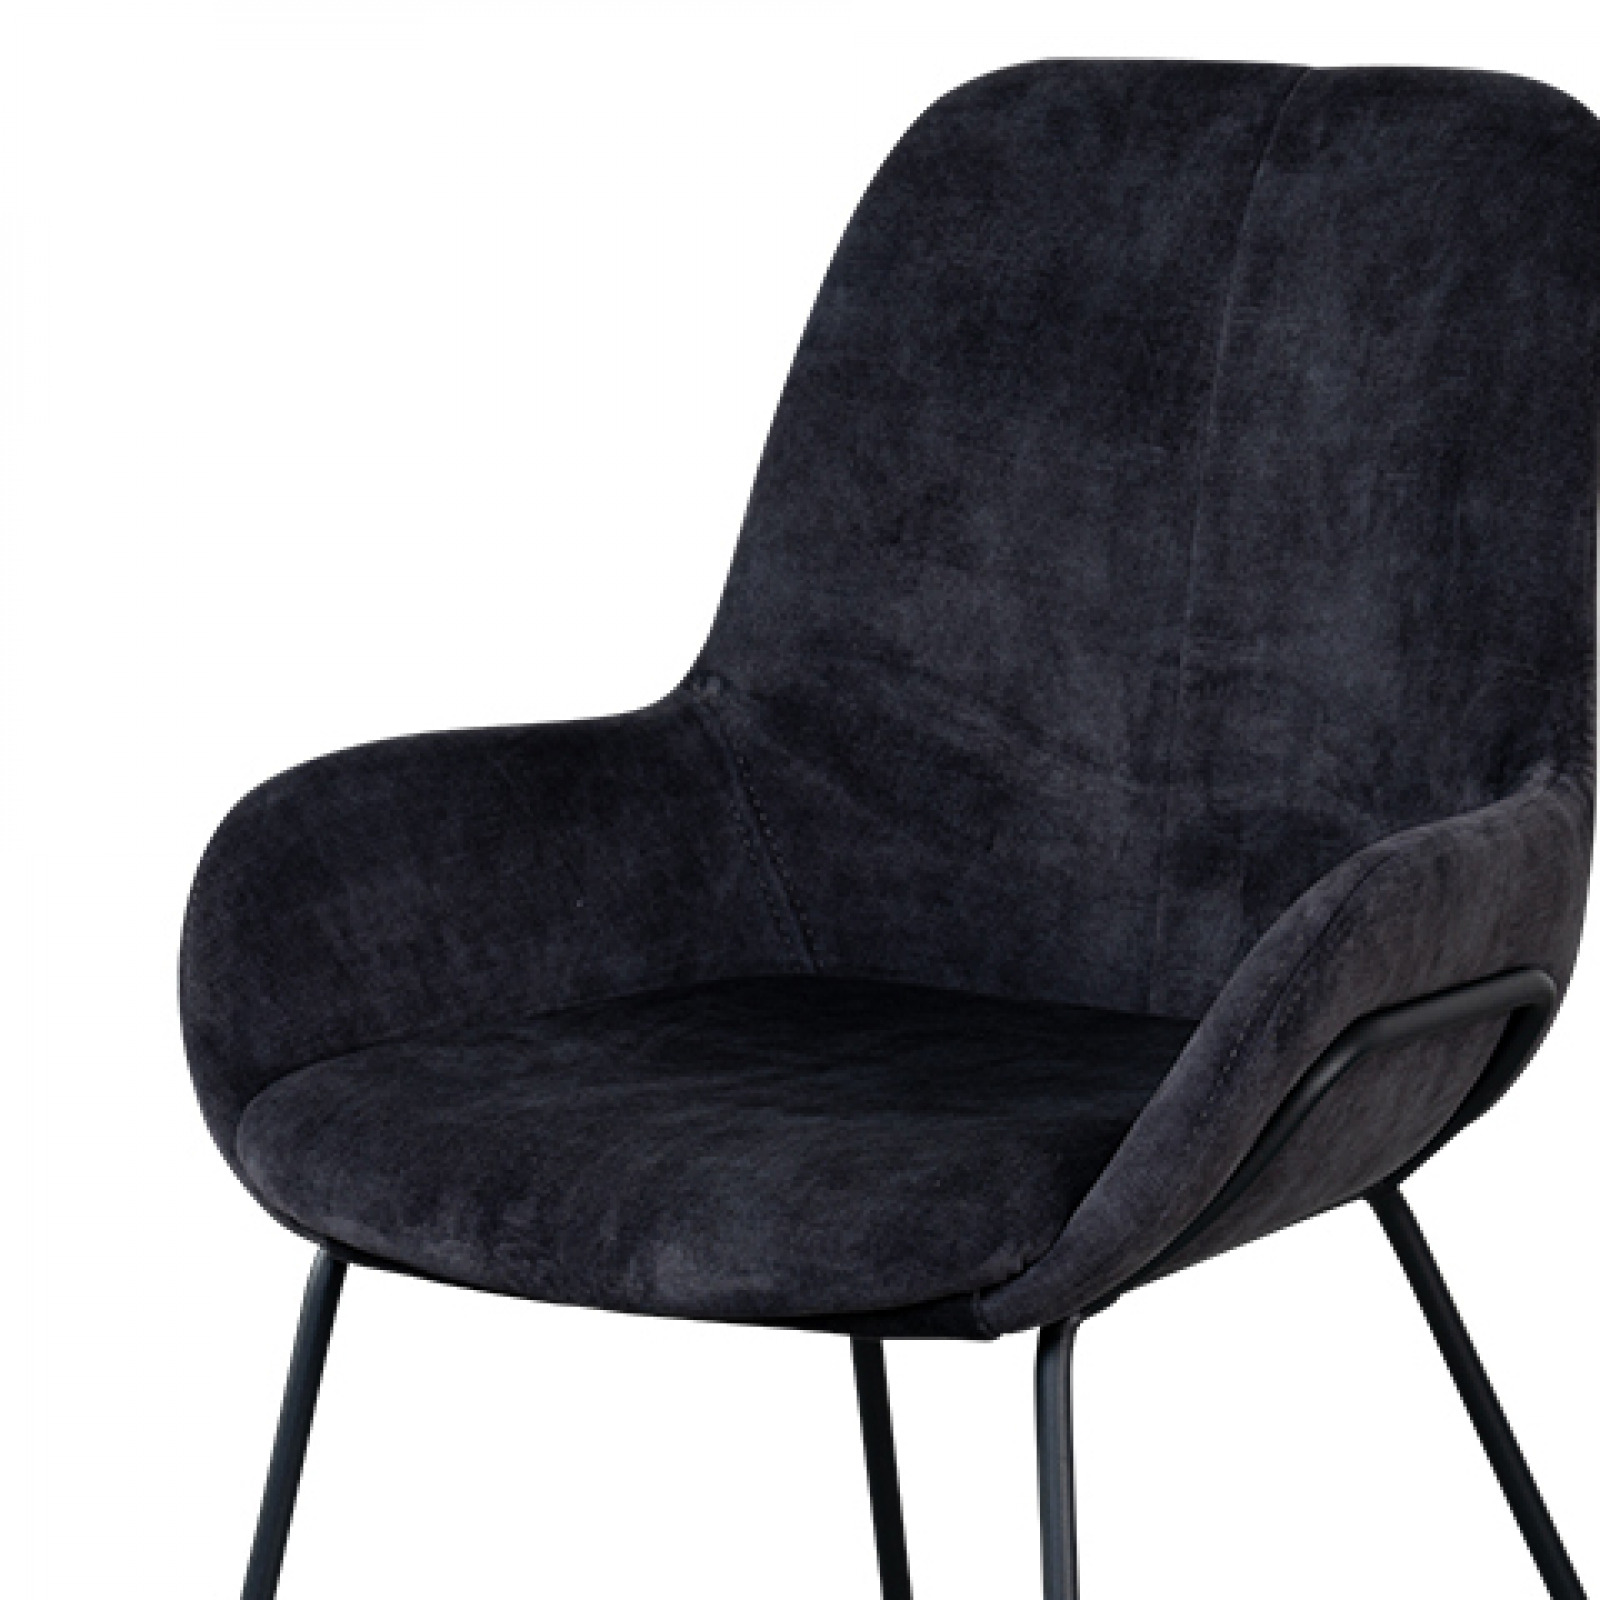 Livingston anthracite chair